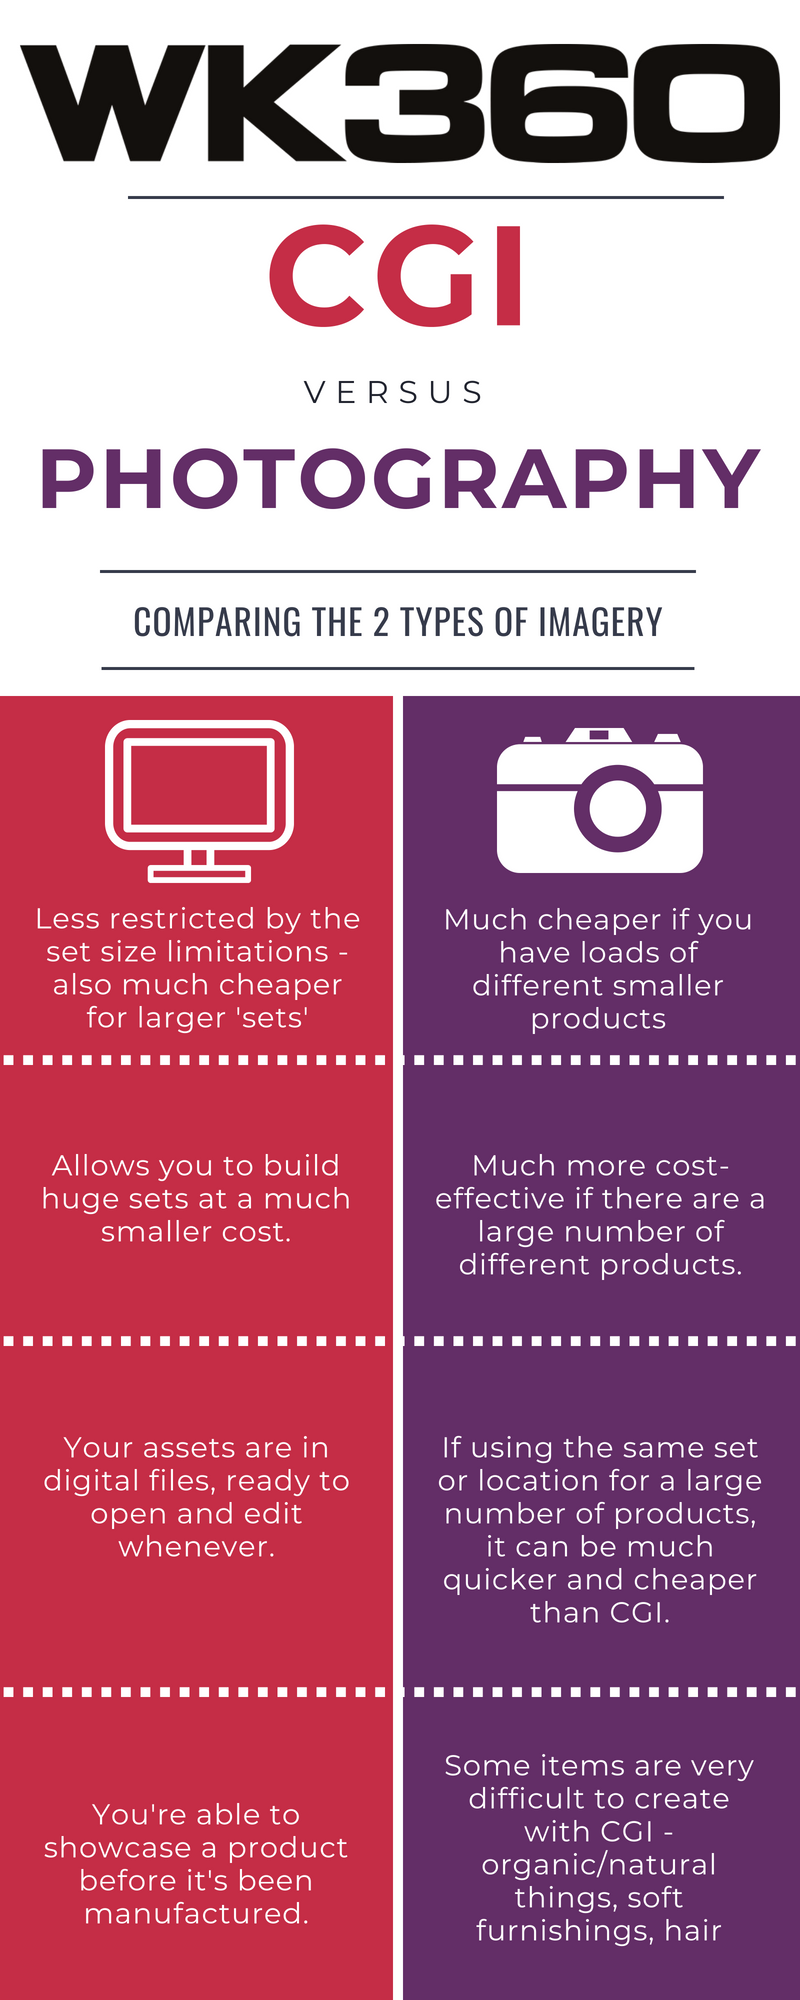 what are the different types of imagery